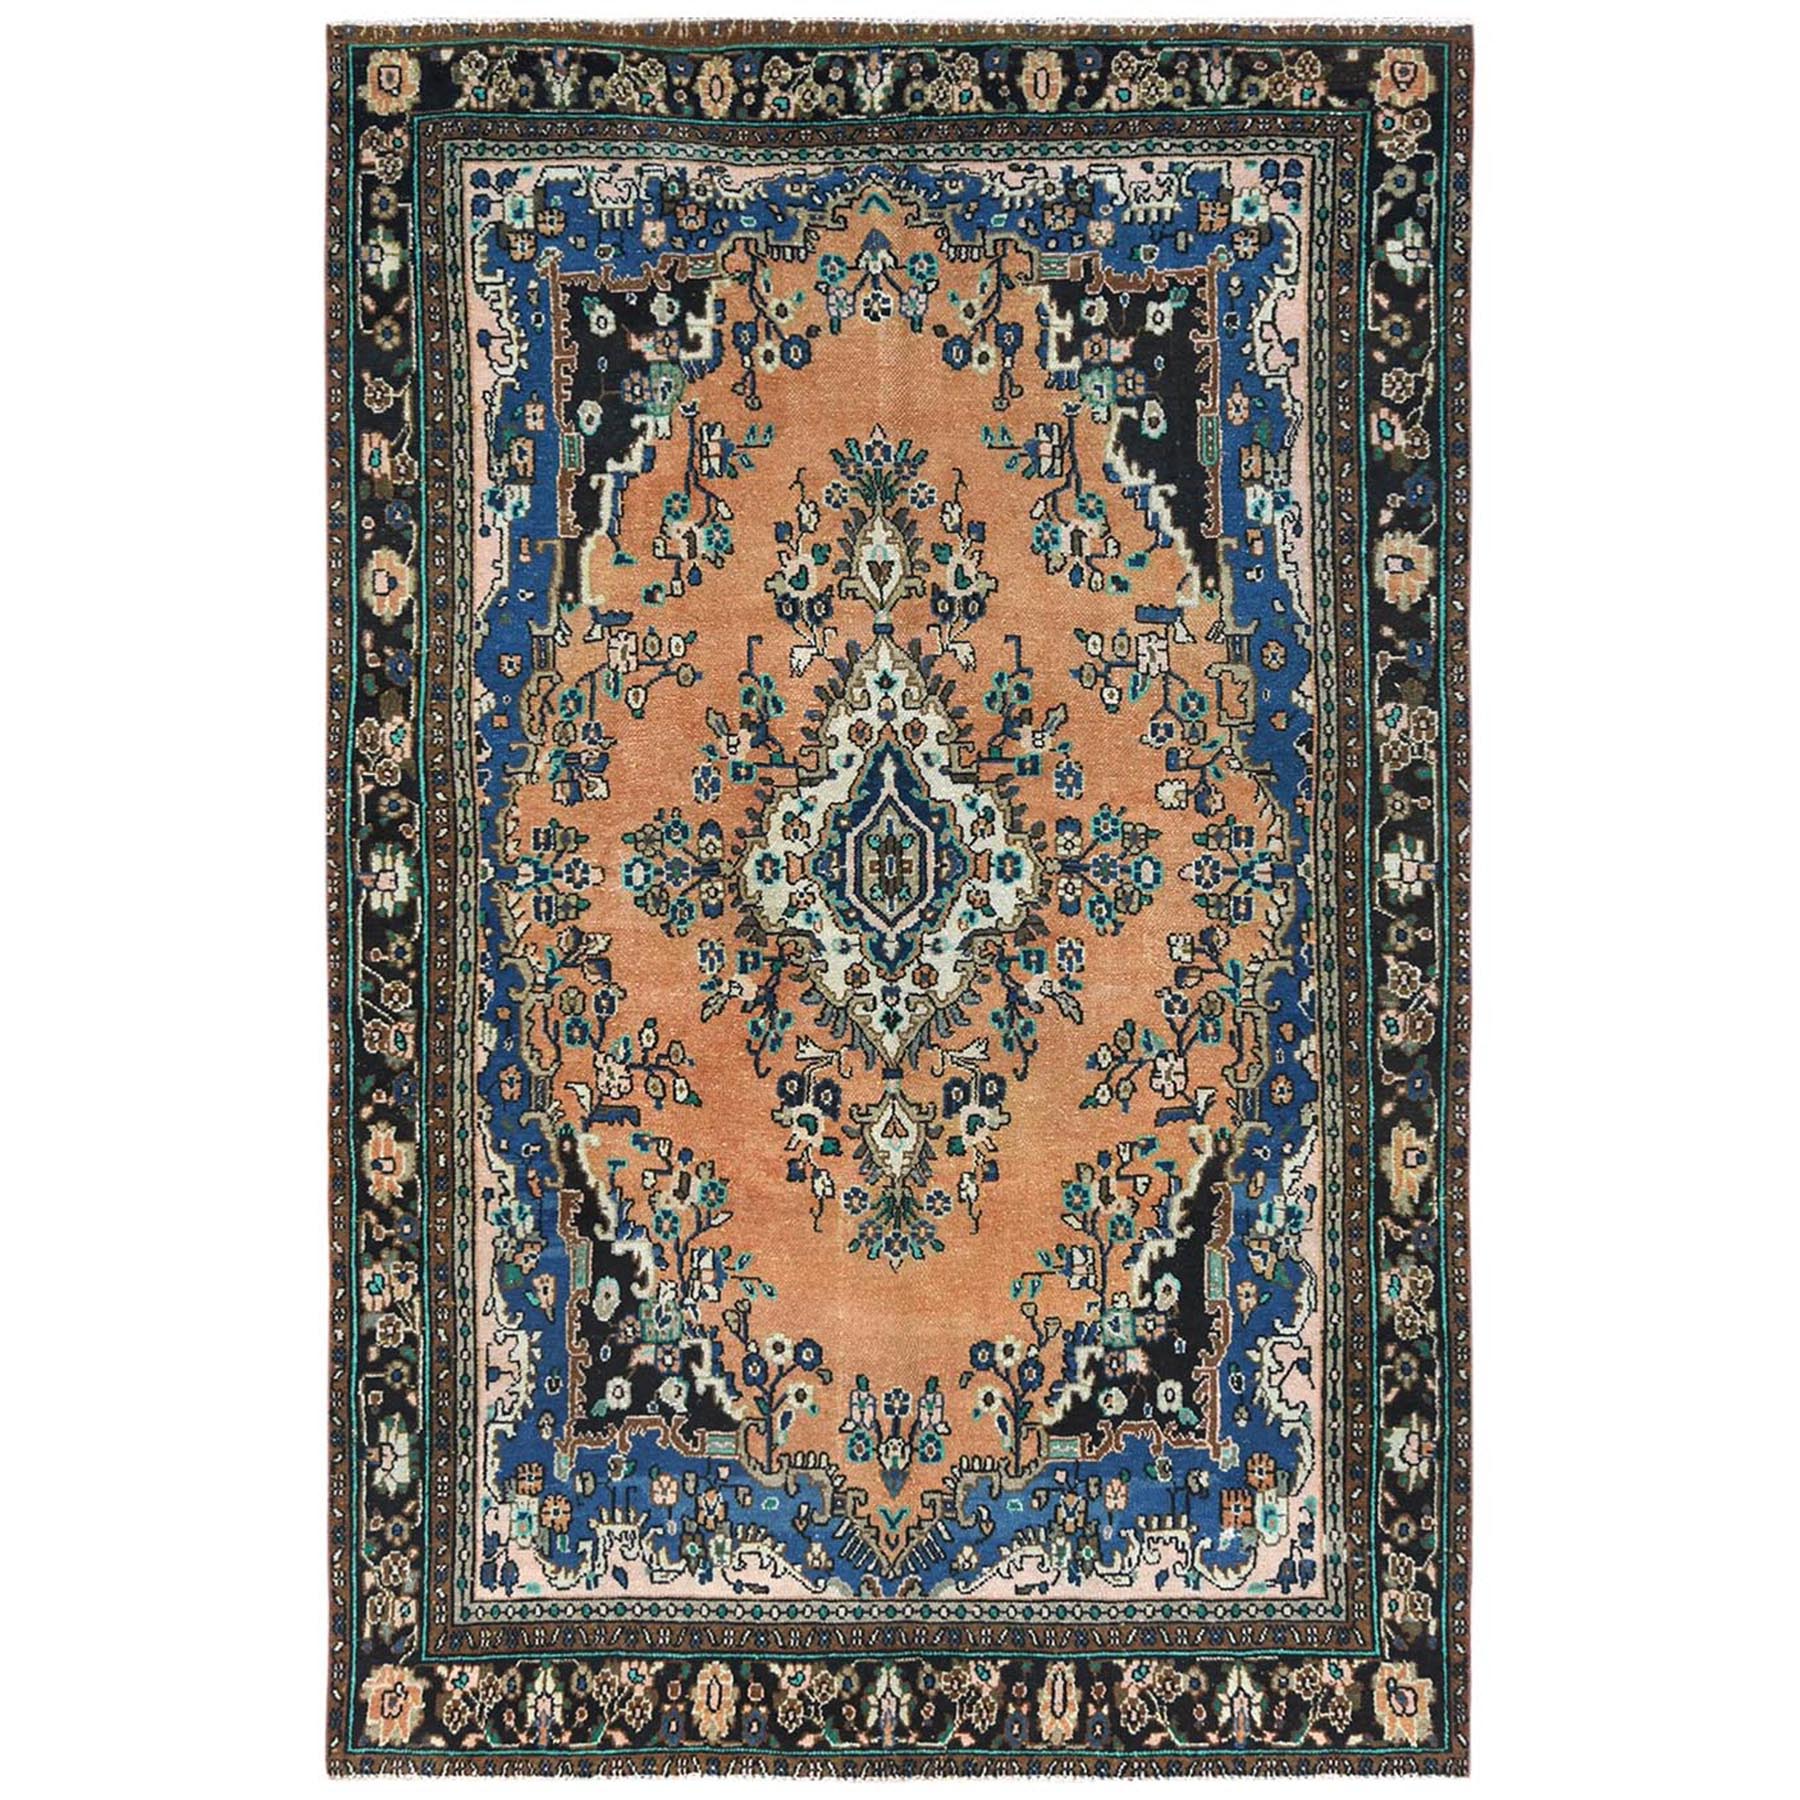  Wool Hand-Knotted Area Rug 6'6